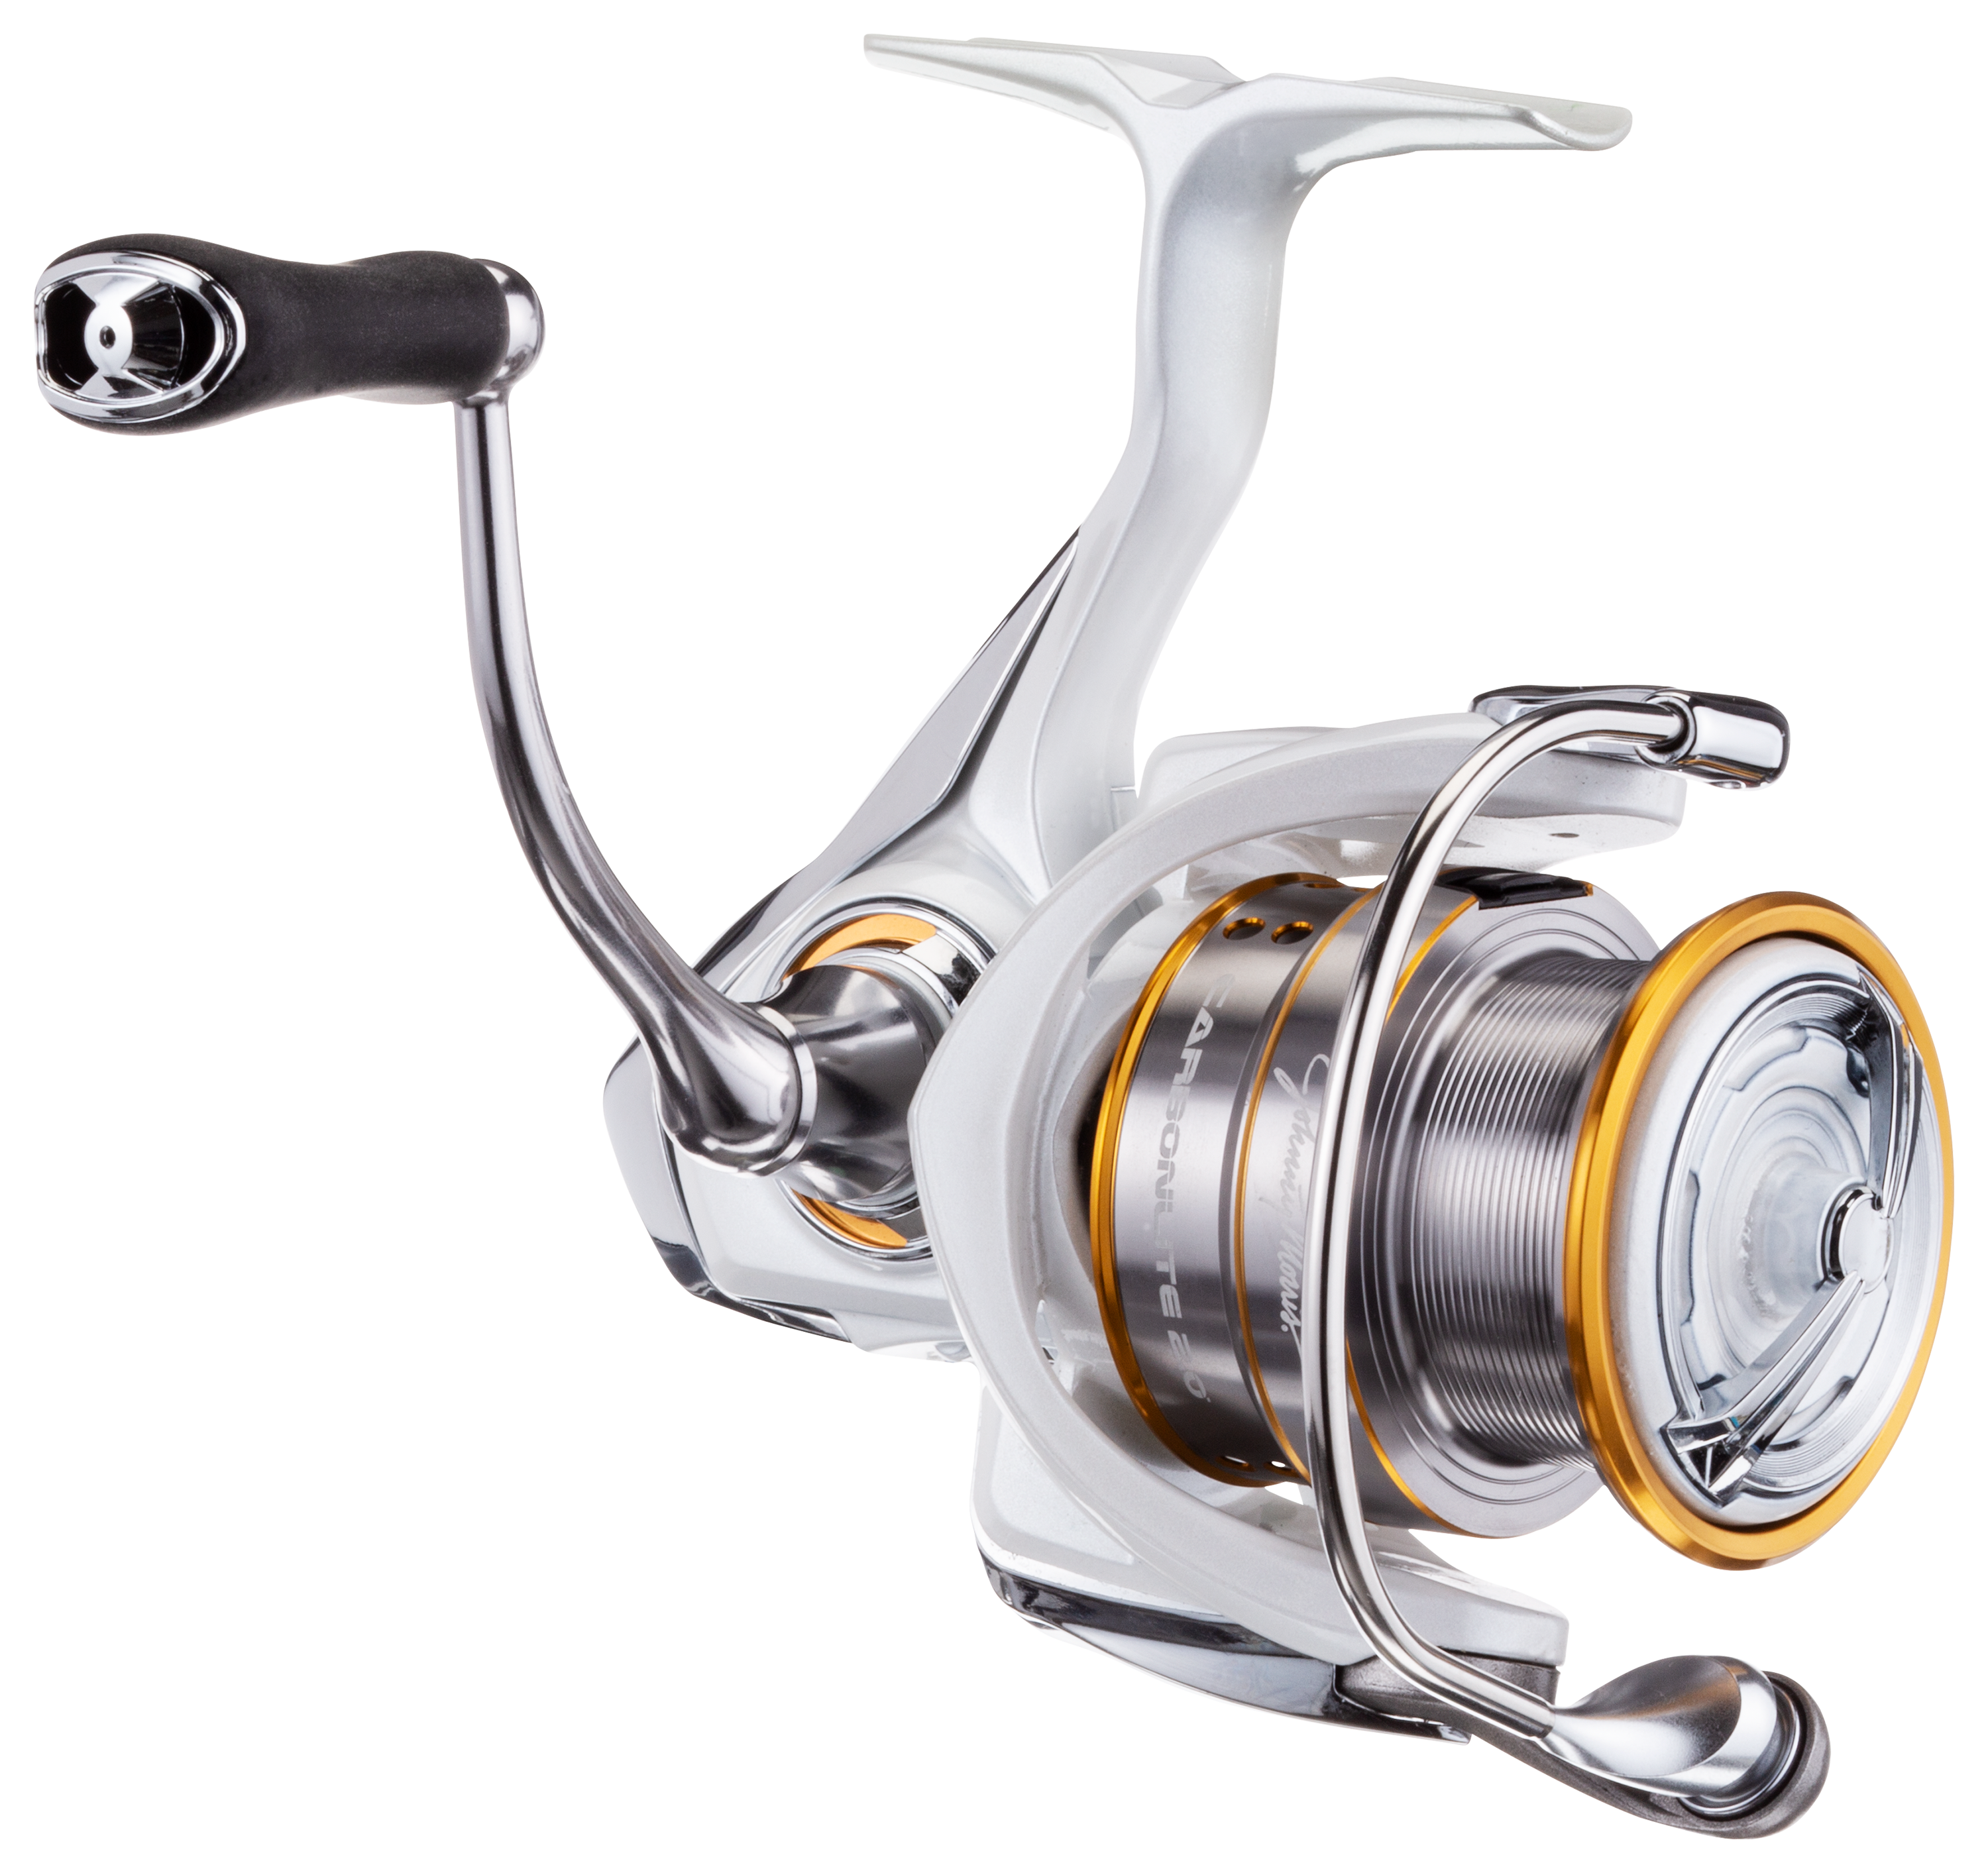 Fresh Water Spinning Reel 12 Bb Cnc Spinning Reel For Reservior